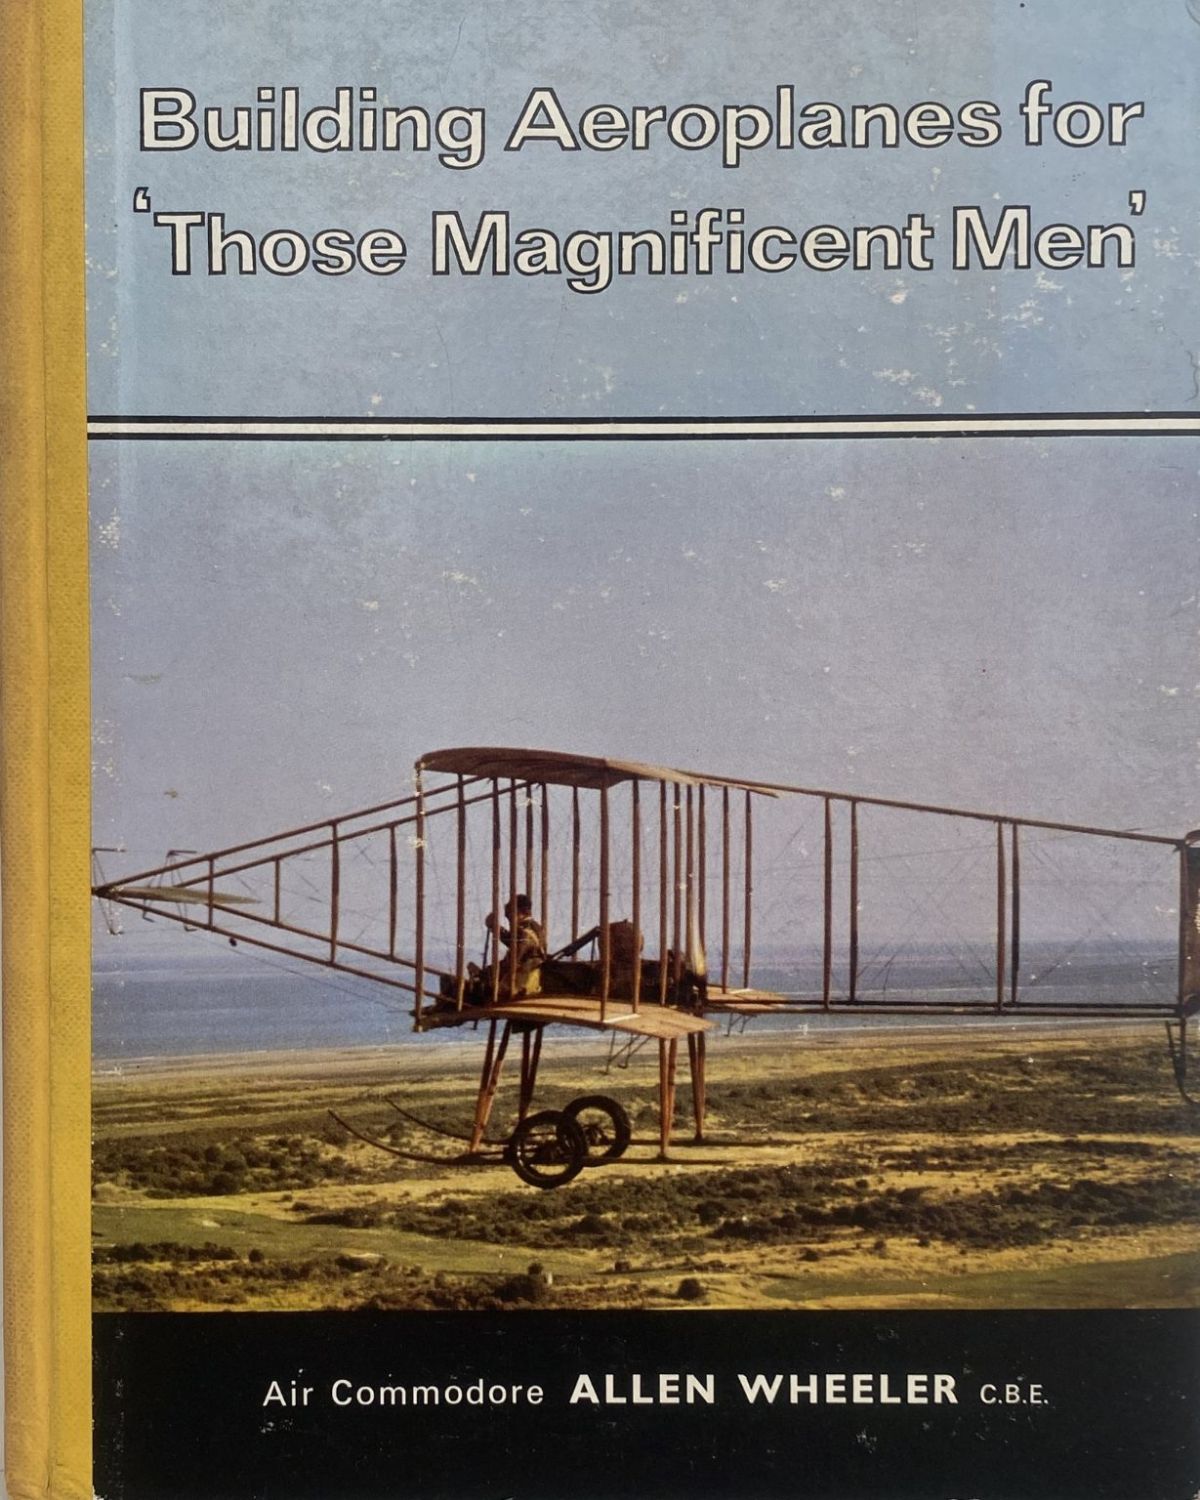 BUILDING AEROPLANES FOR 'THOSE MAGNIFICENT MEN'